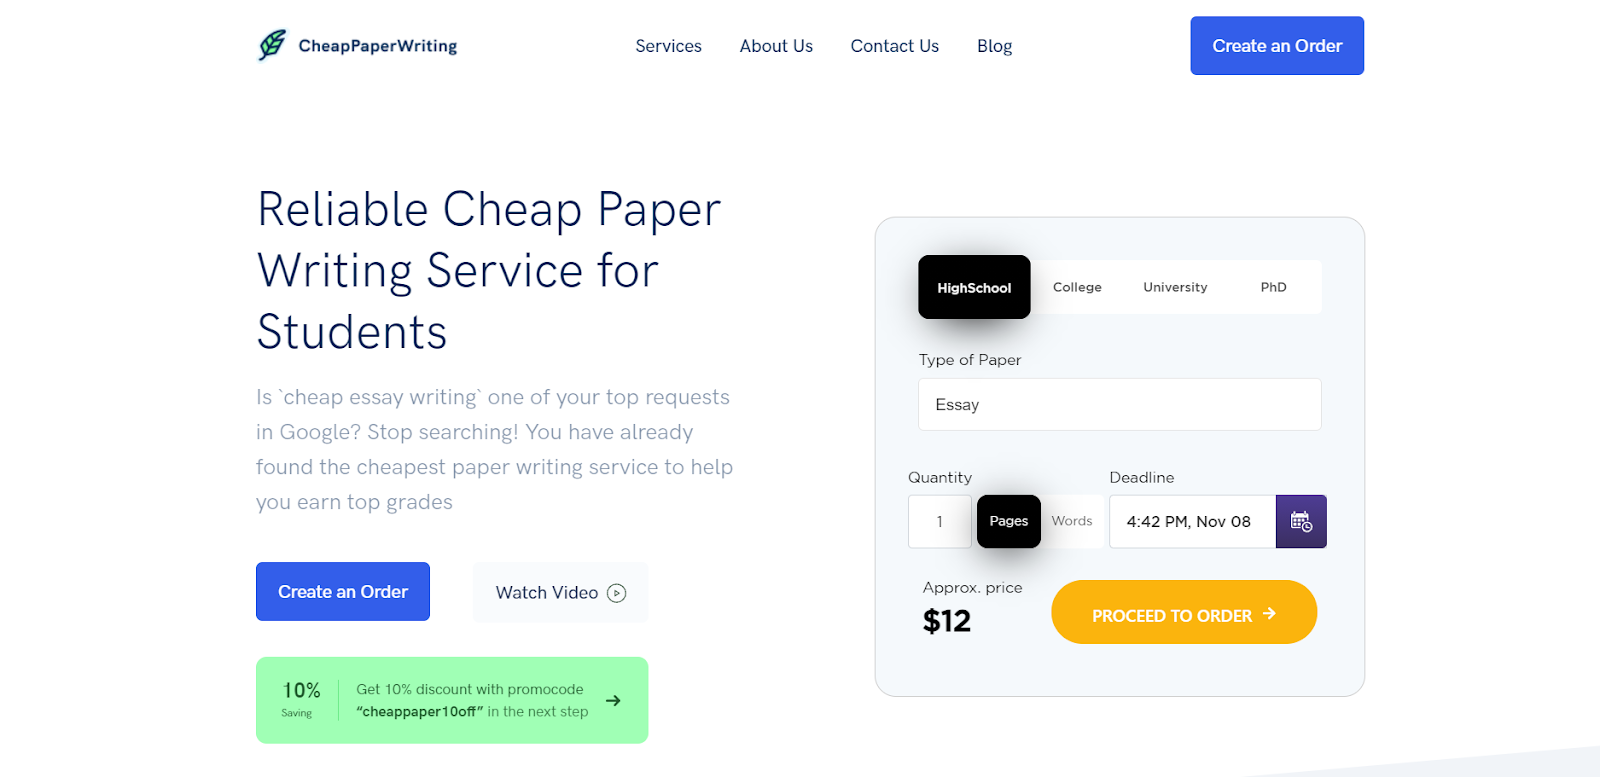 CheapPaperWriting Homepage Image / Price Calculation